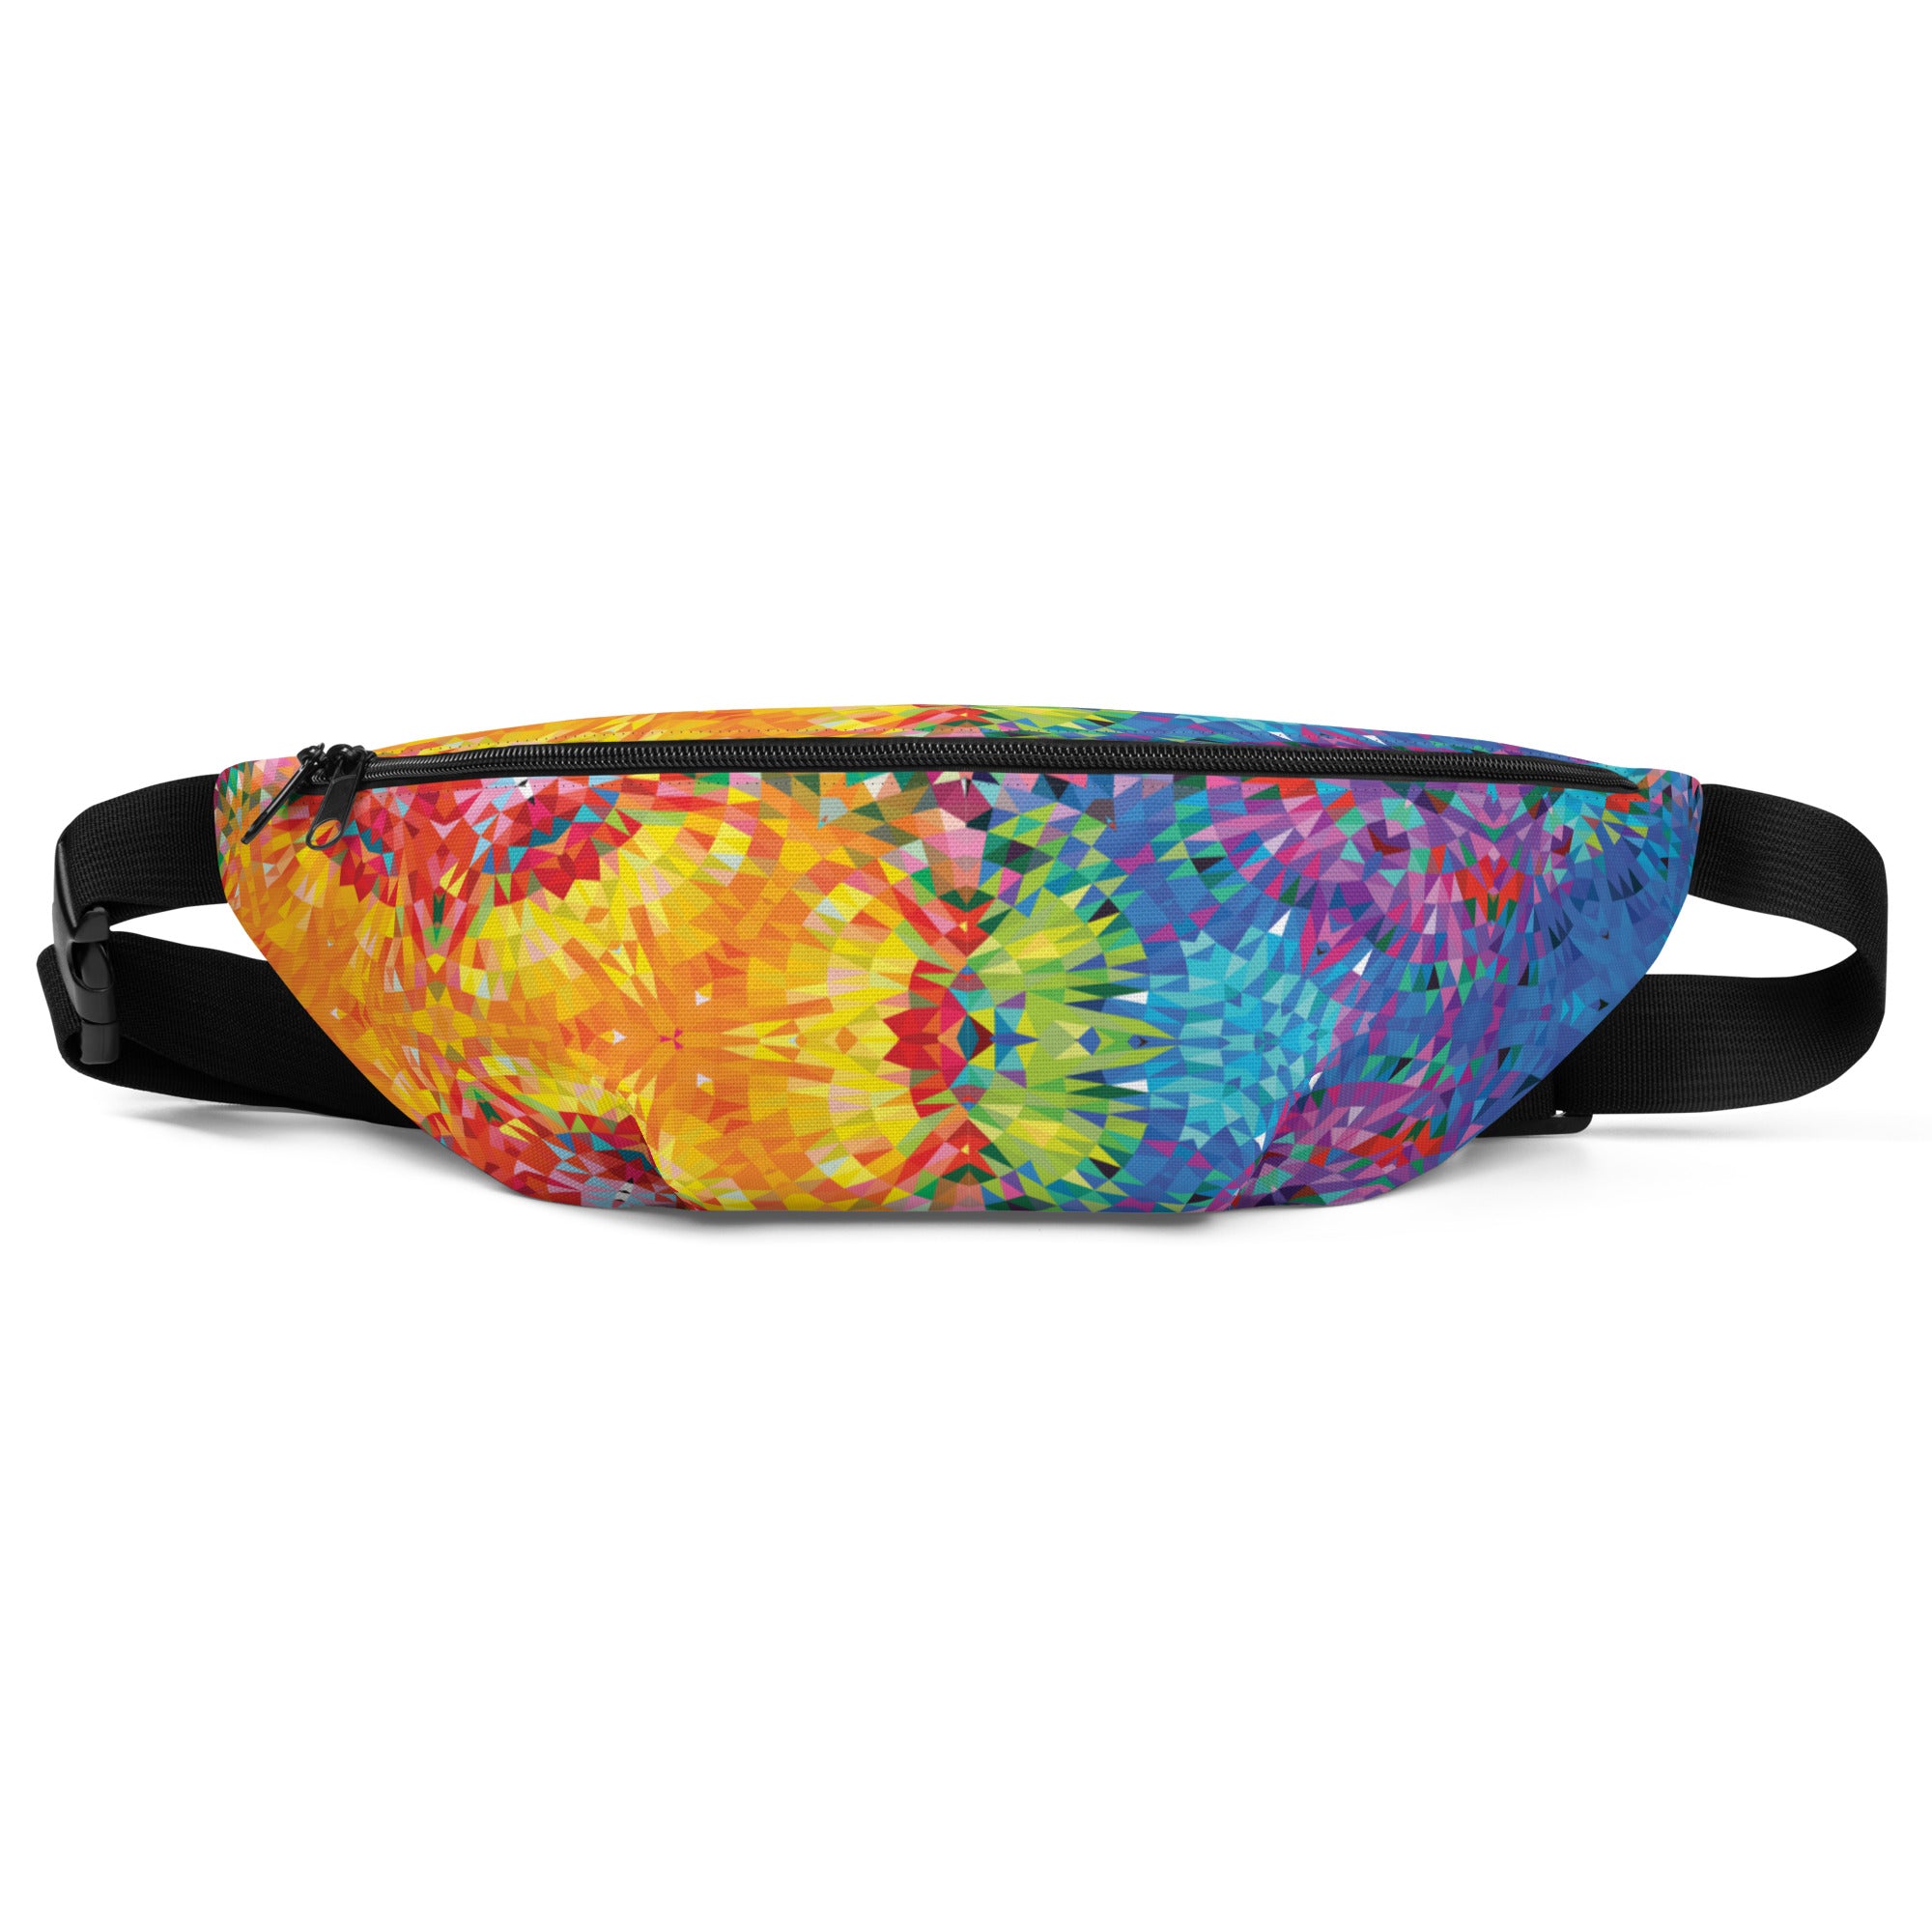 The Fanny Pack // PRIDE-O-SCOPE